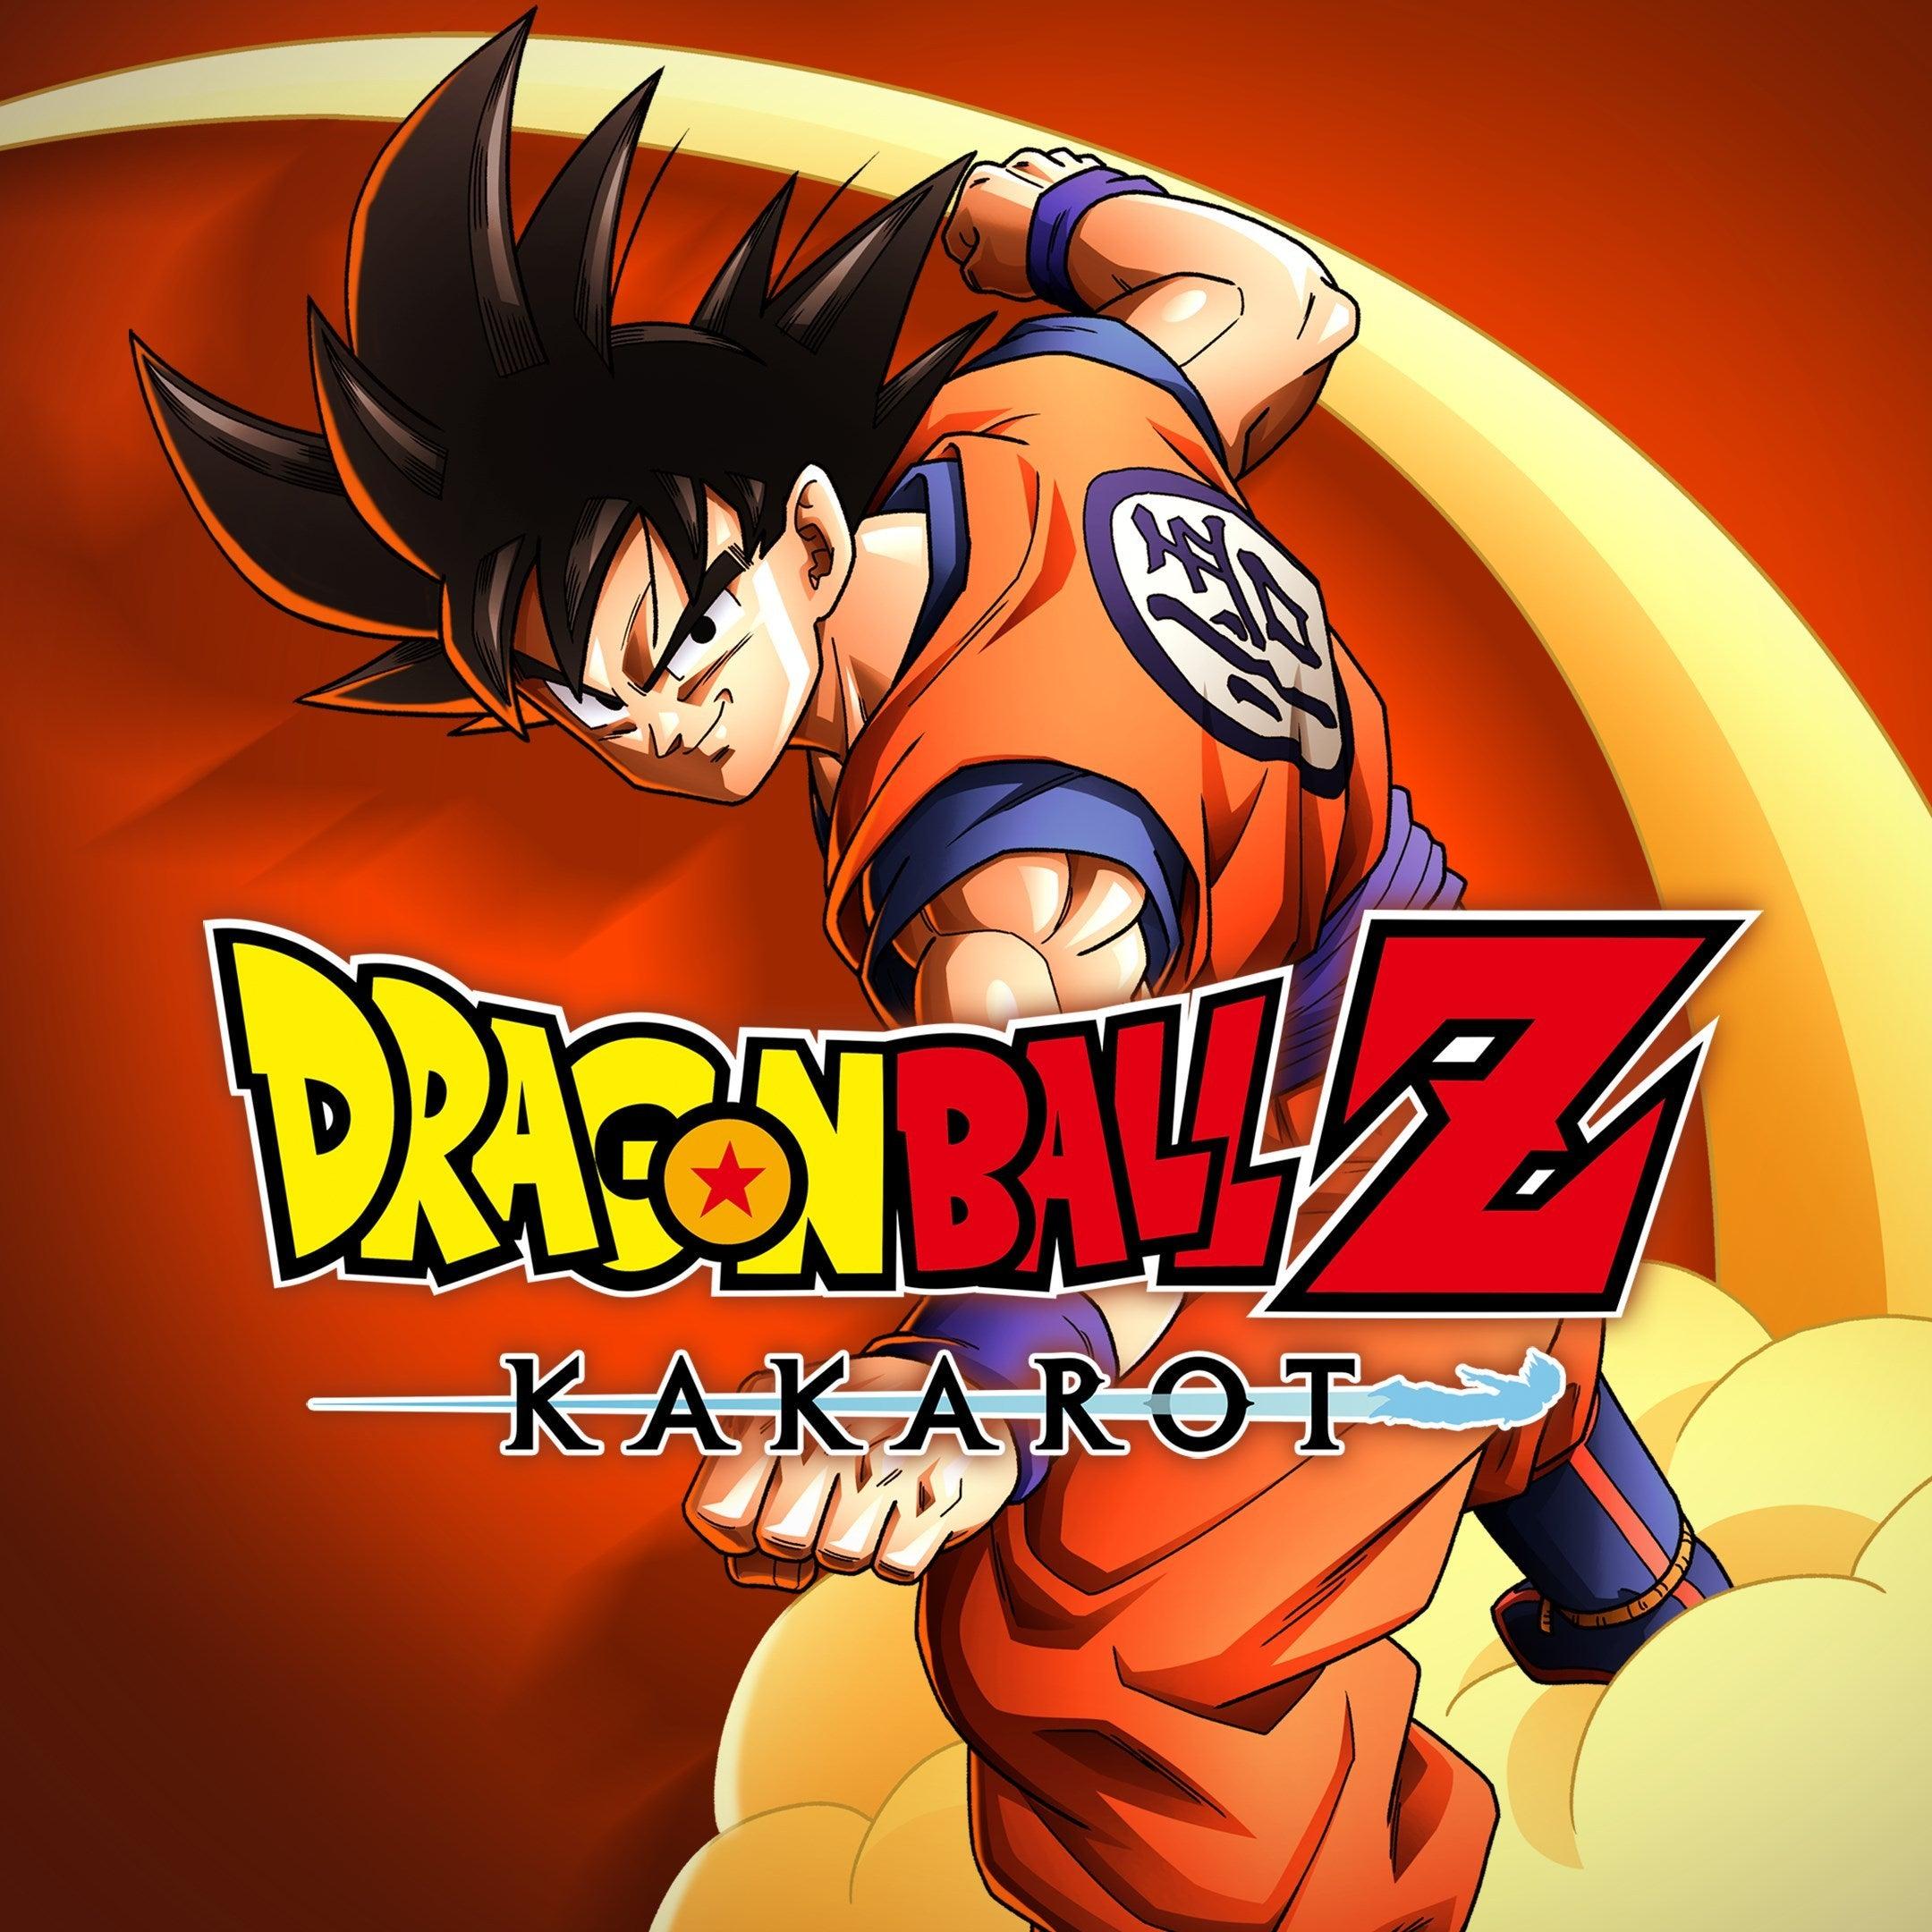 what the new dragon ball z series